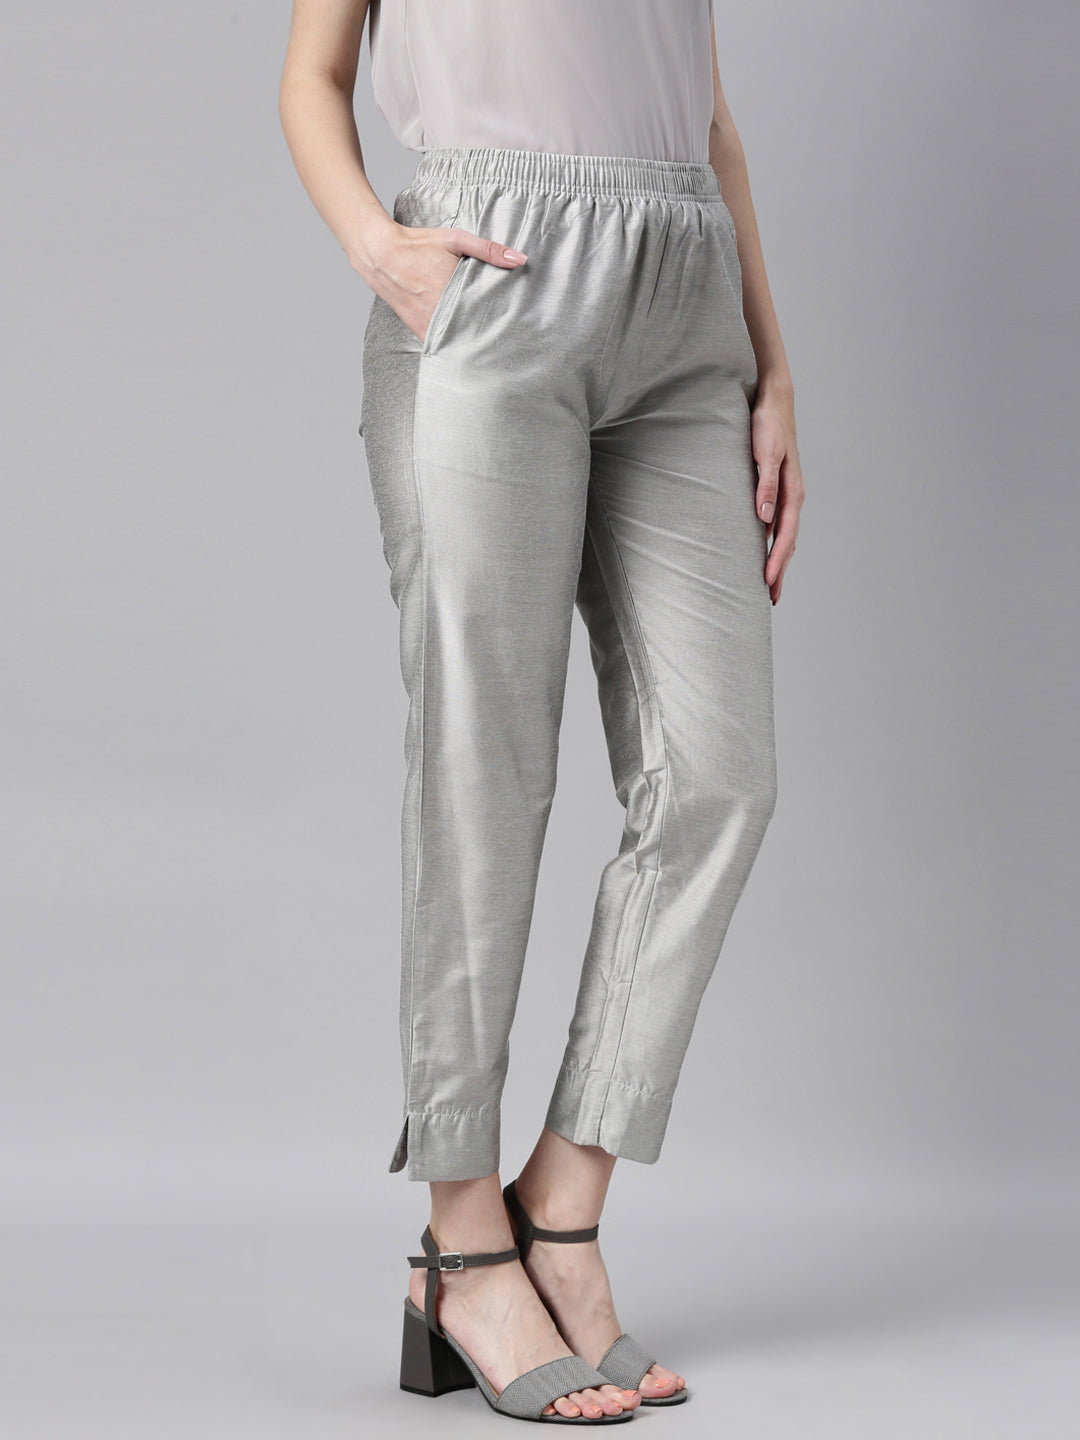 LYRA Women Original Mid-Rise Cigarette Trousers Price in India, Full  Specifications & Offers | DTashion.com